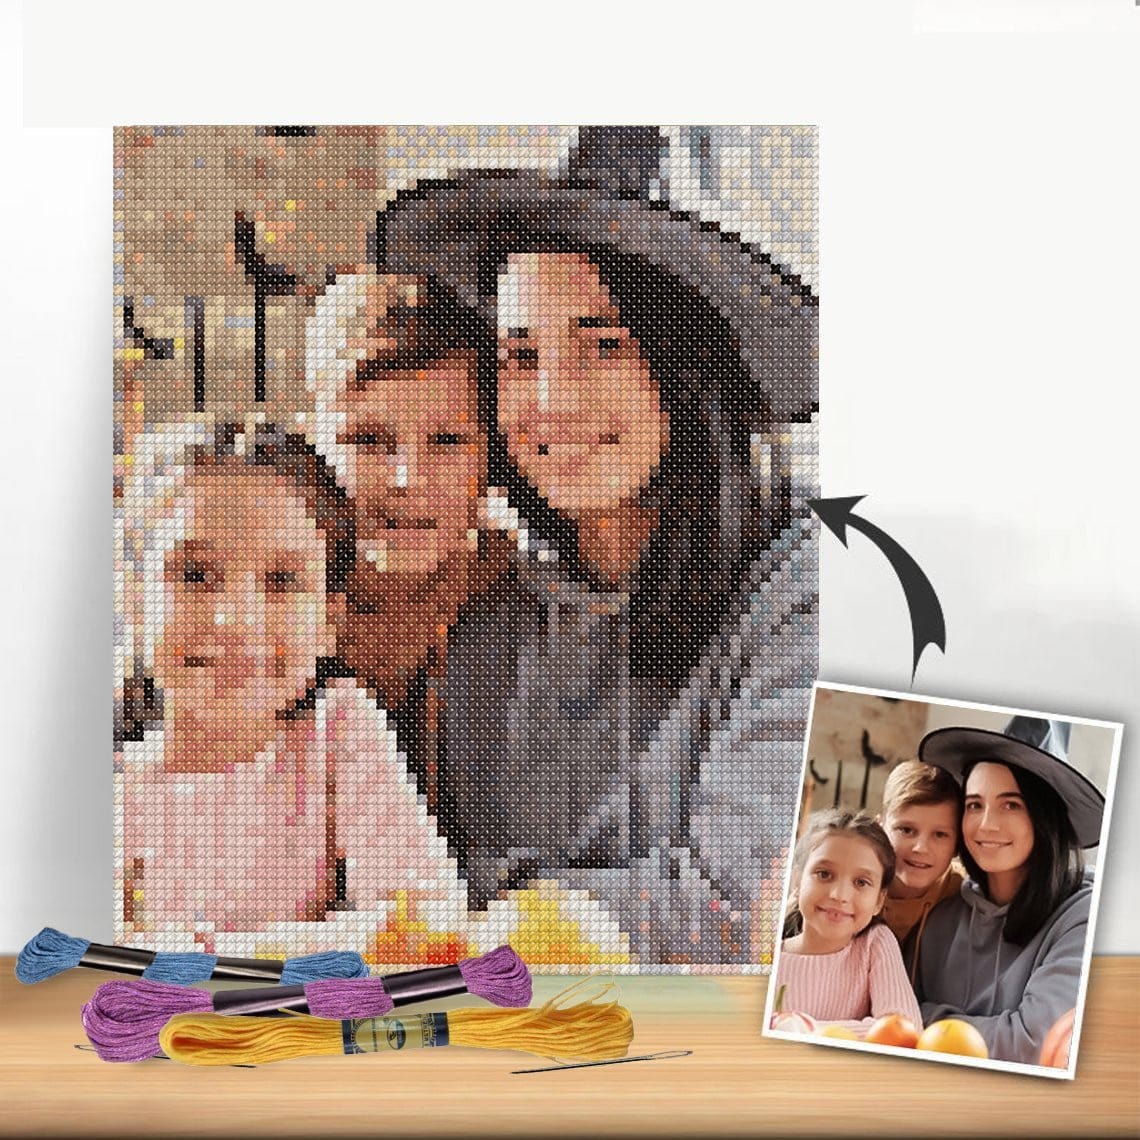 Custom Pet Cross Stitch Tapestry Kit | Just Upload Your Own Photo! - Cross Stitched